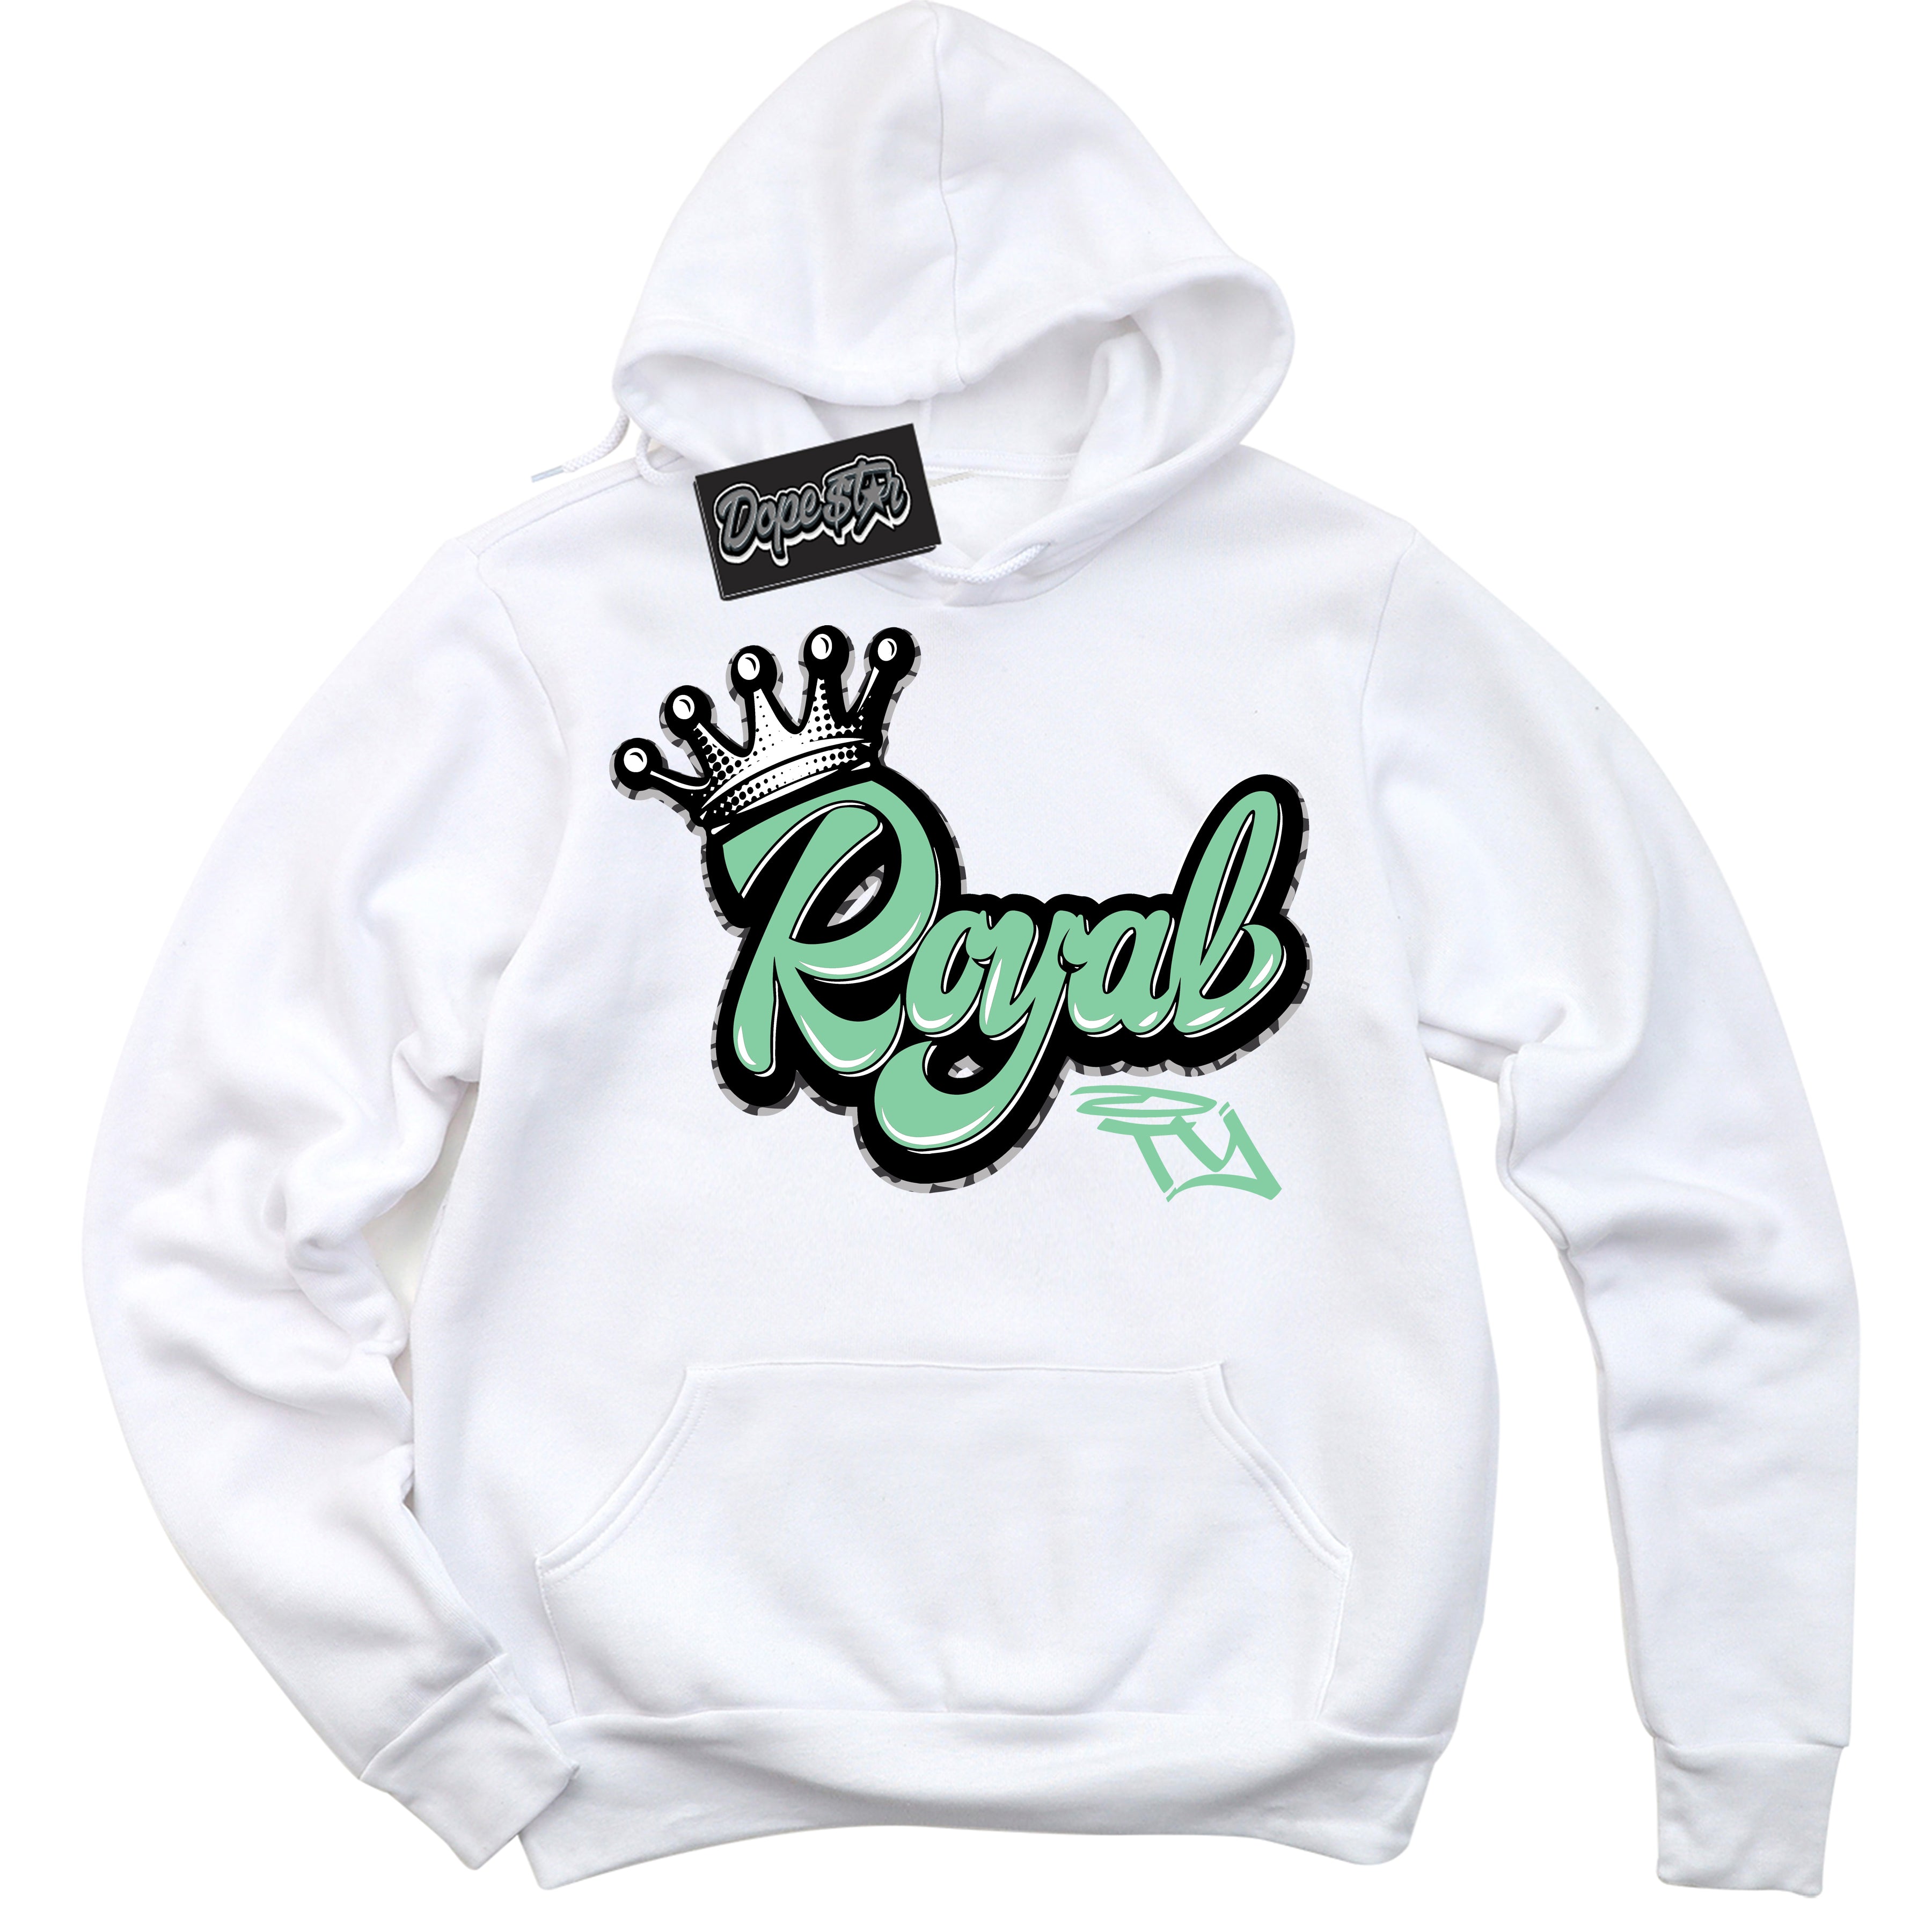 Cool White Graphic DopeStar Hoodie with “ Royalty “ print, that perfectly matches Green Glow 3s sneakers